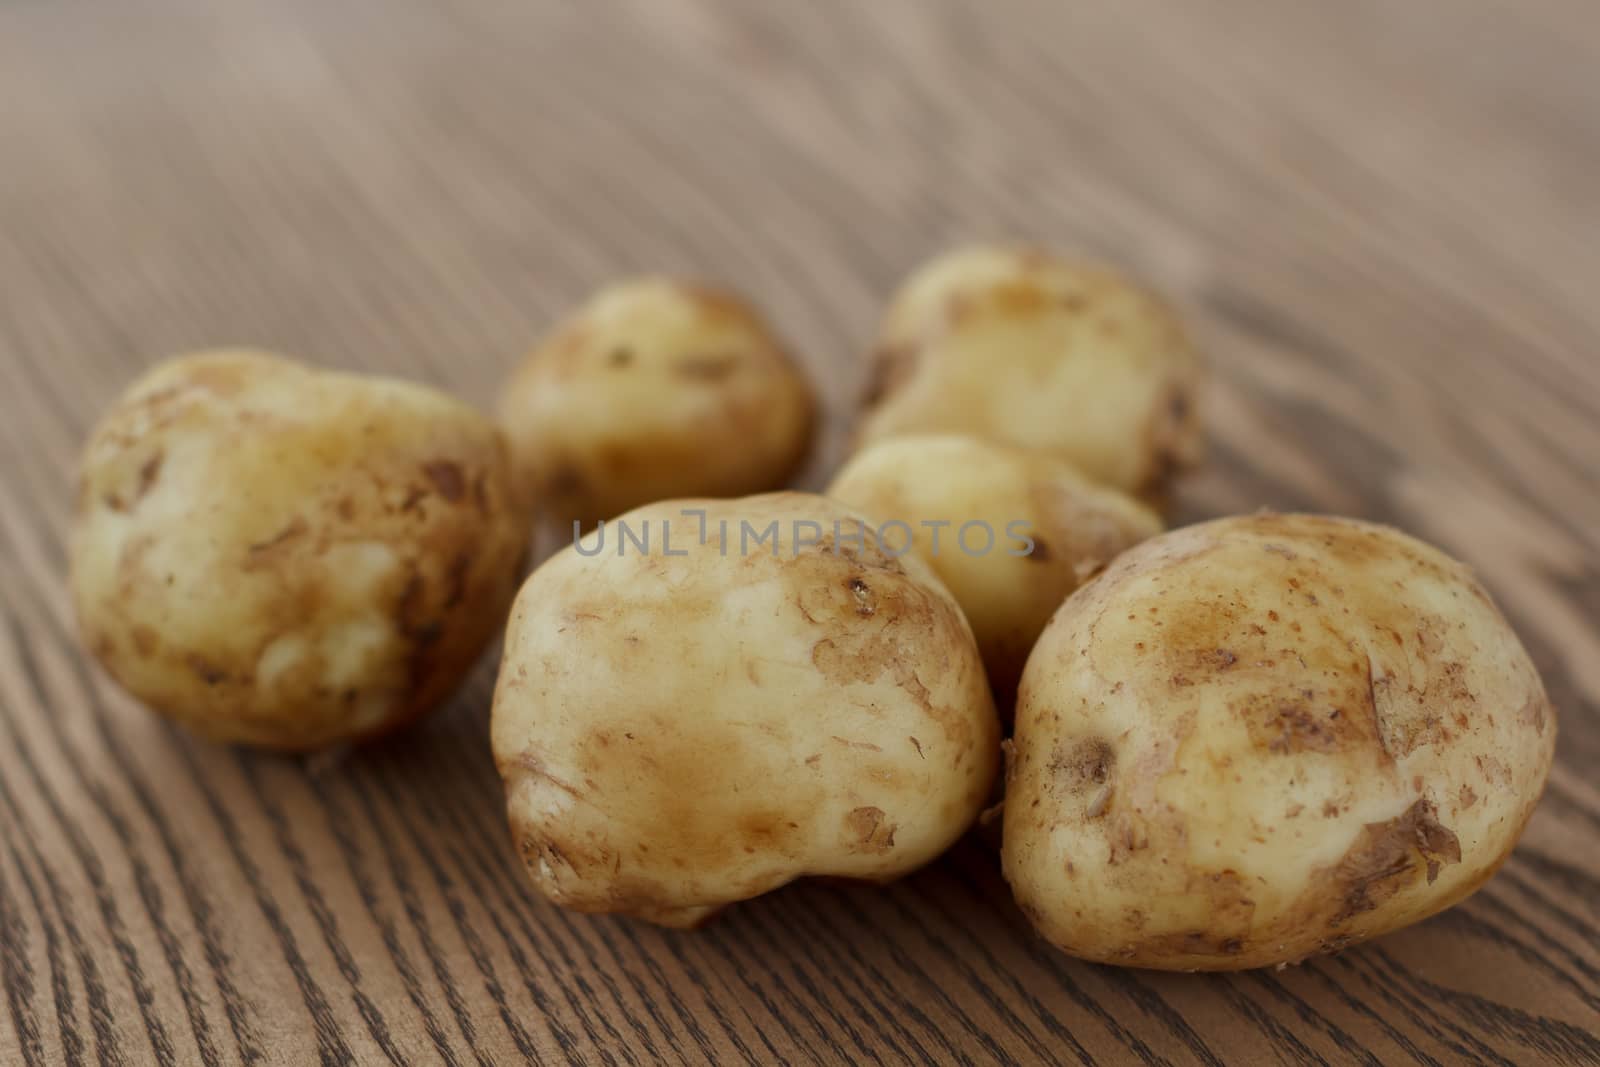 Heap of raw potato lying on the wooden background.